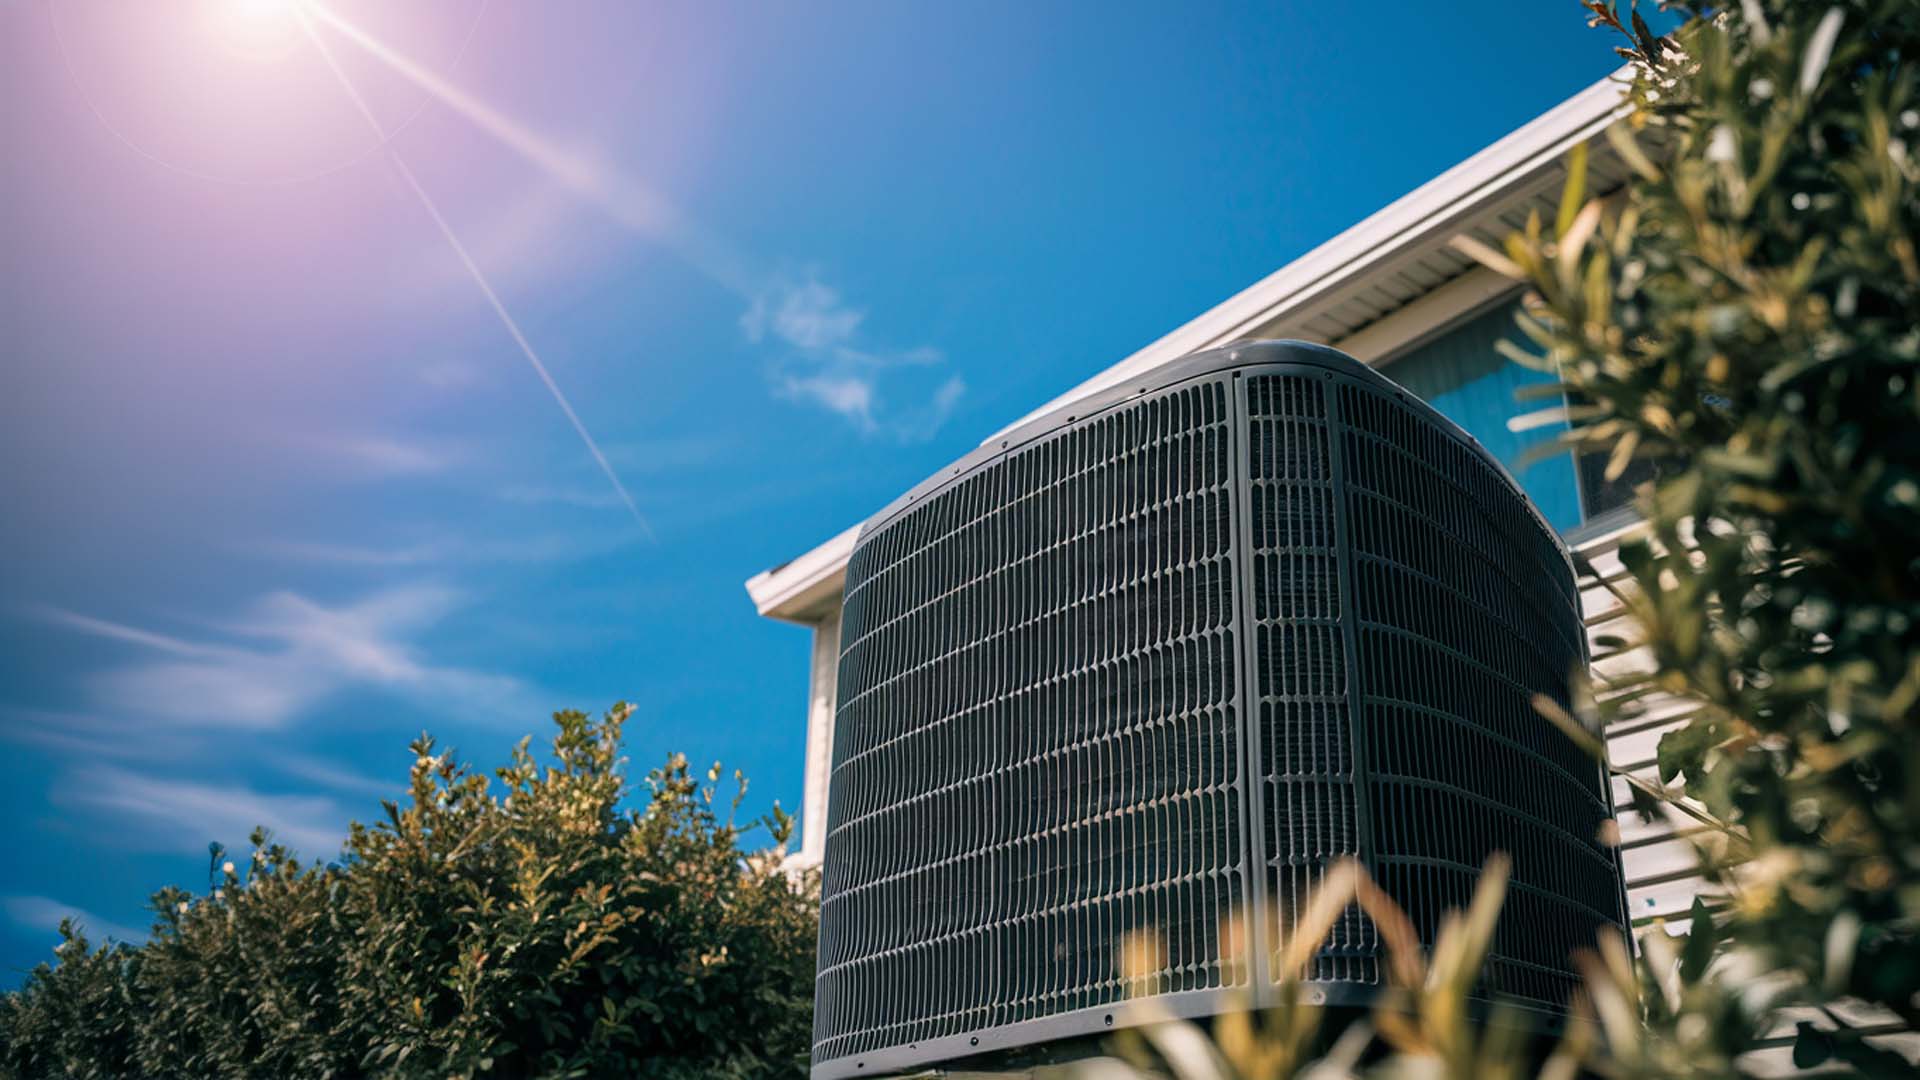 Outdoor air conditioning unit next to a house with clear blue skies and sunlight in the background.